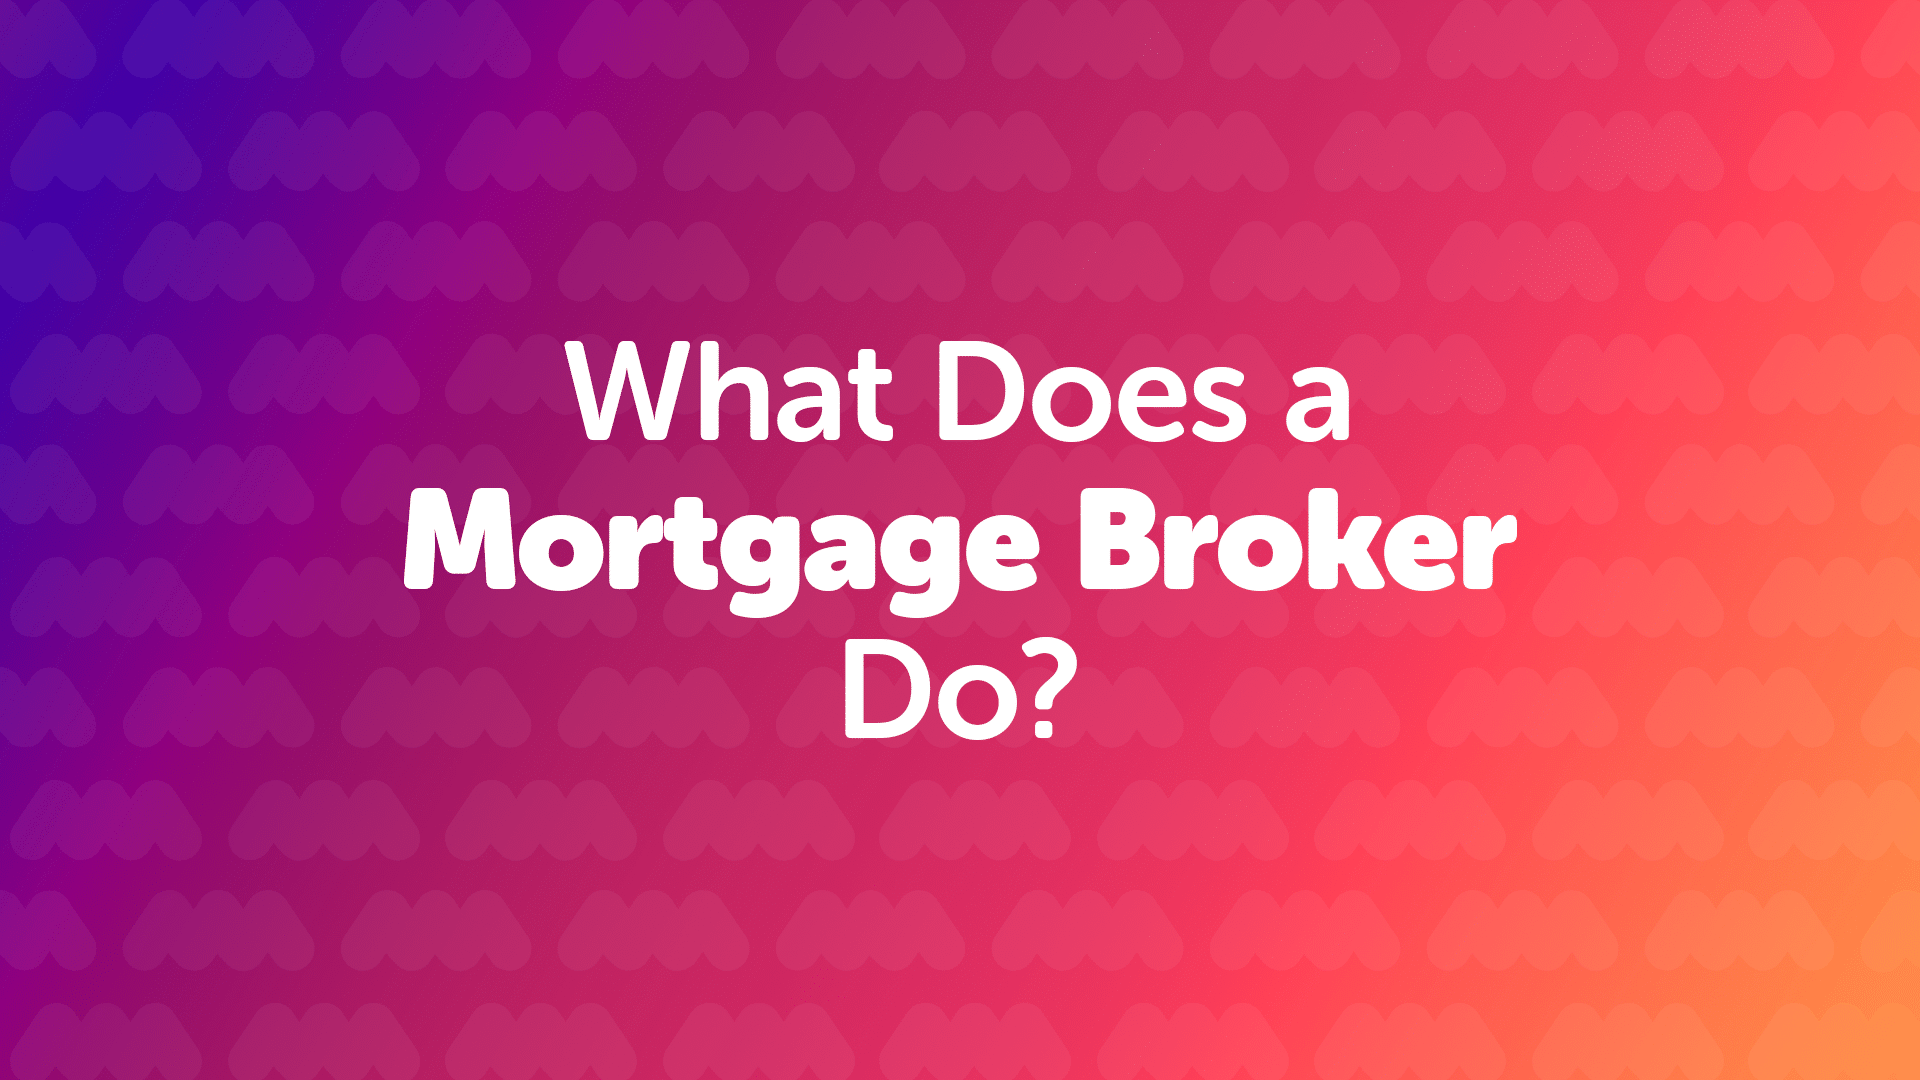 What Does a Mortgage Broker in Hull Do?